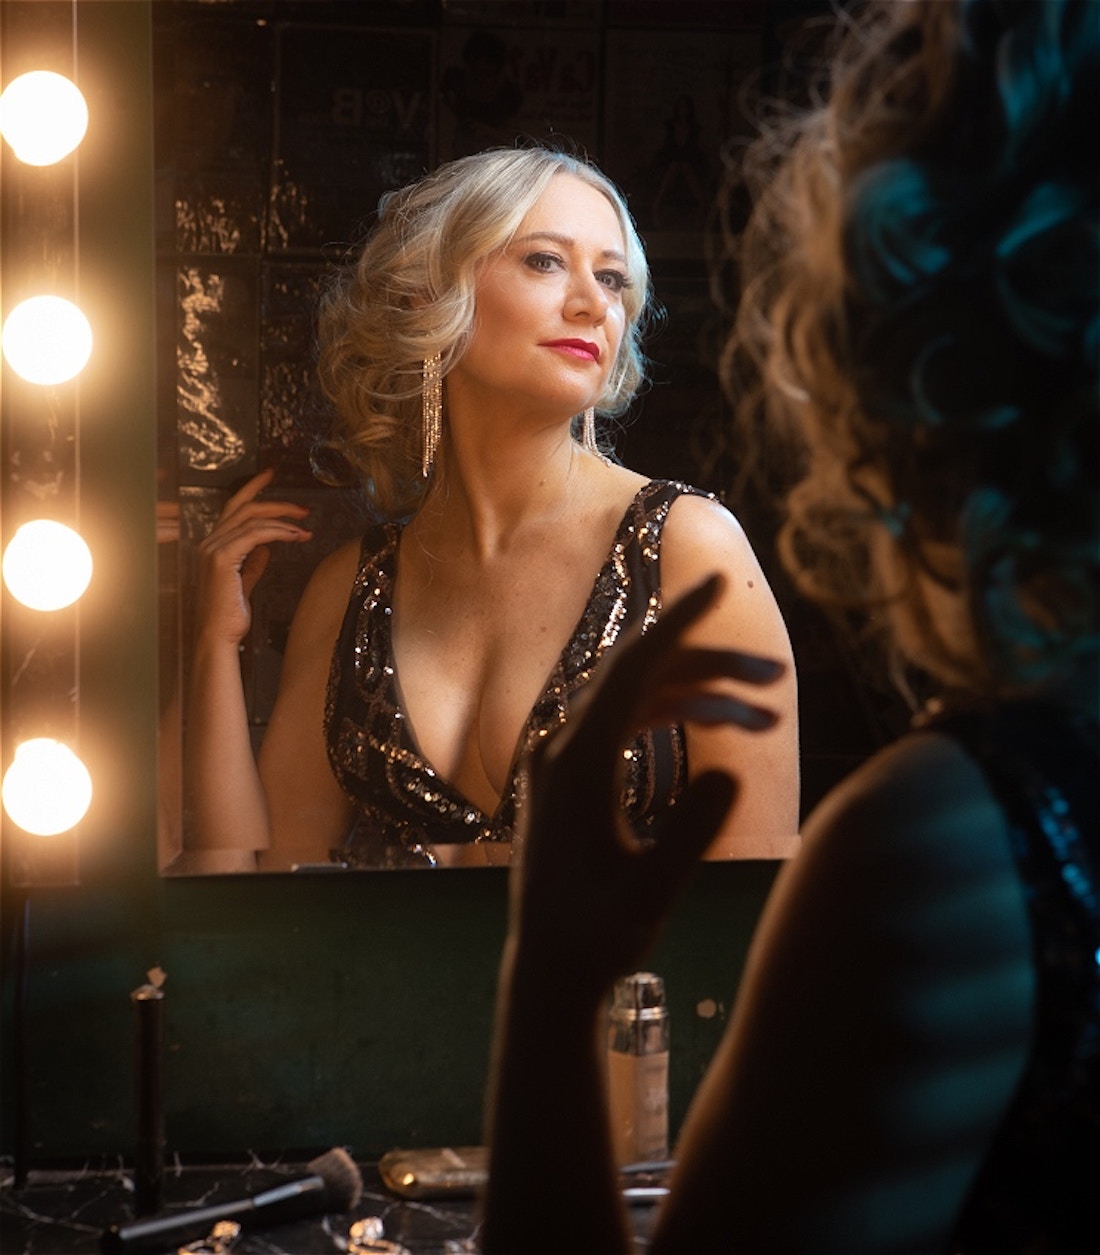 Performer Clare Elizabeth Dea, a Caucasian adult woman is sitting in front of a dressing room mirror with diva lights around it. She is wearing a black sequin dress, long silver dangling earrings and her blonde hair is short and curled. We see a dark image of the back of Clare's hair, shoulder and arm and in the mirror see a diva character looking posed but not all together.